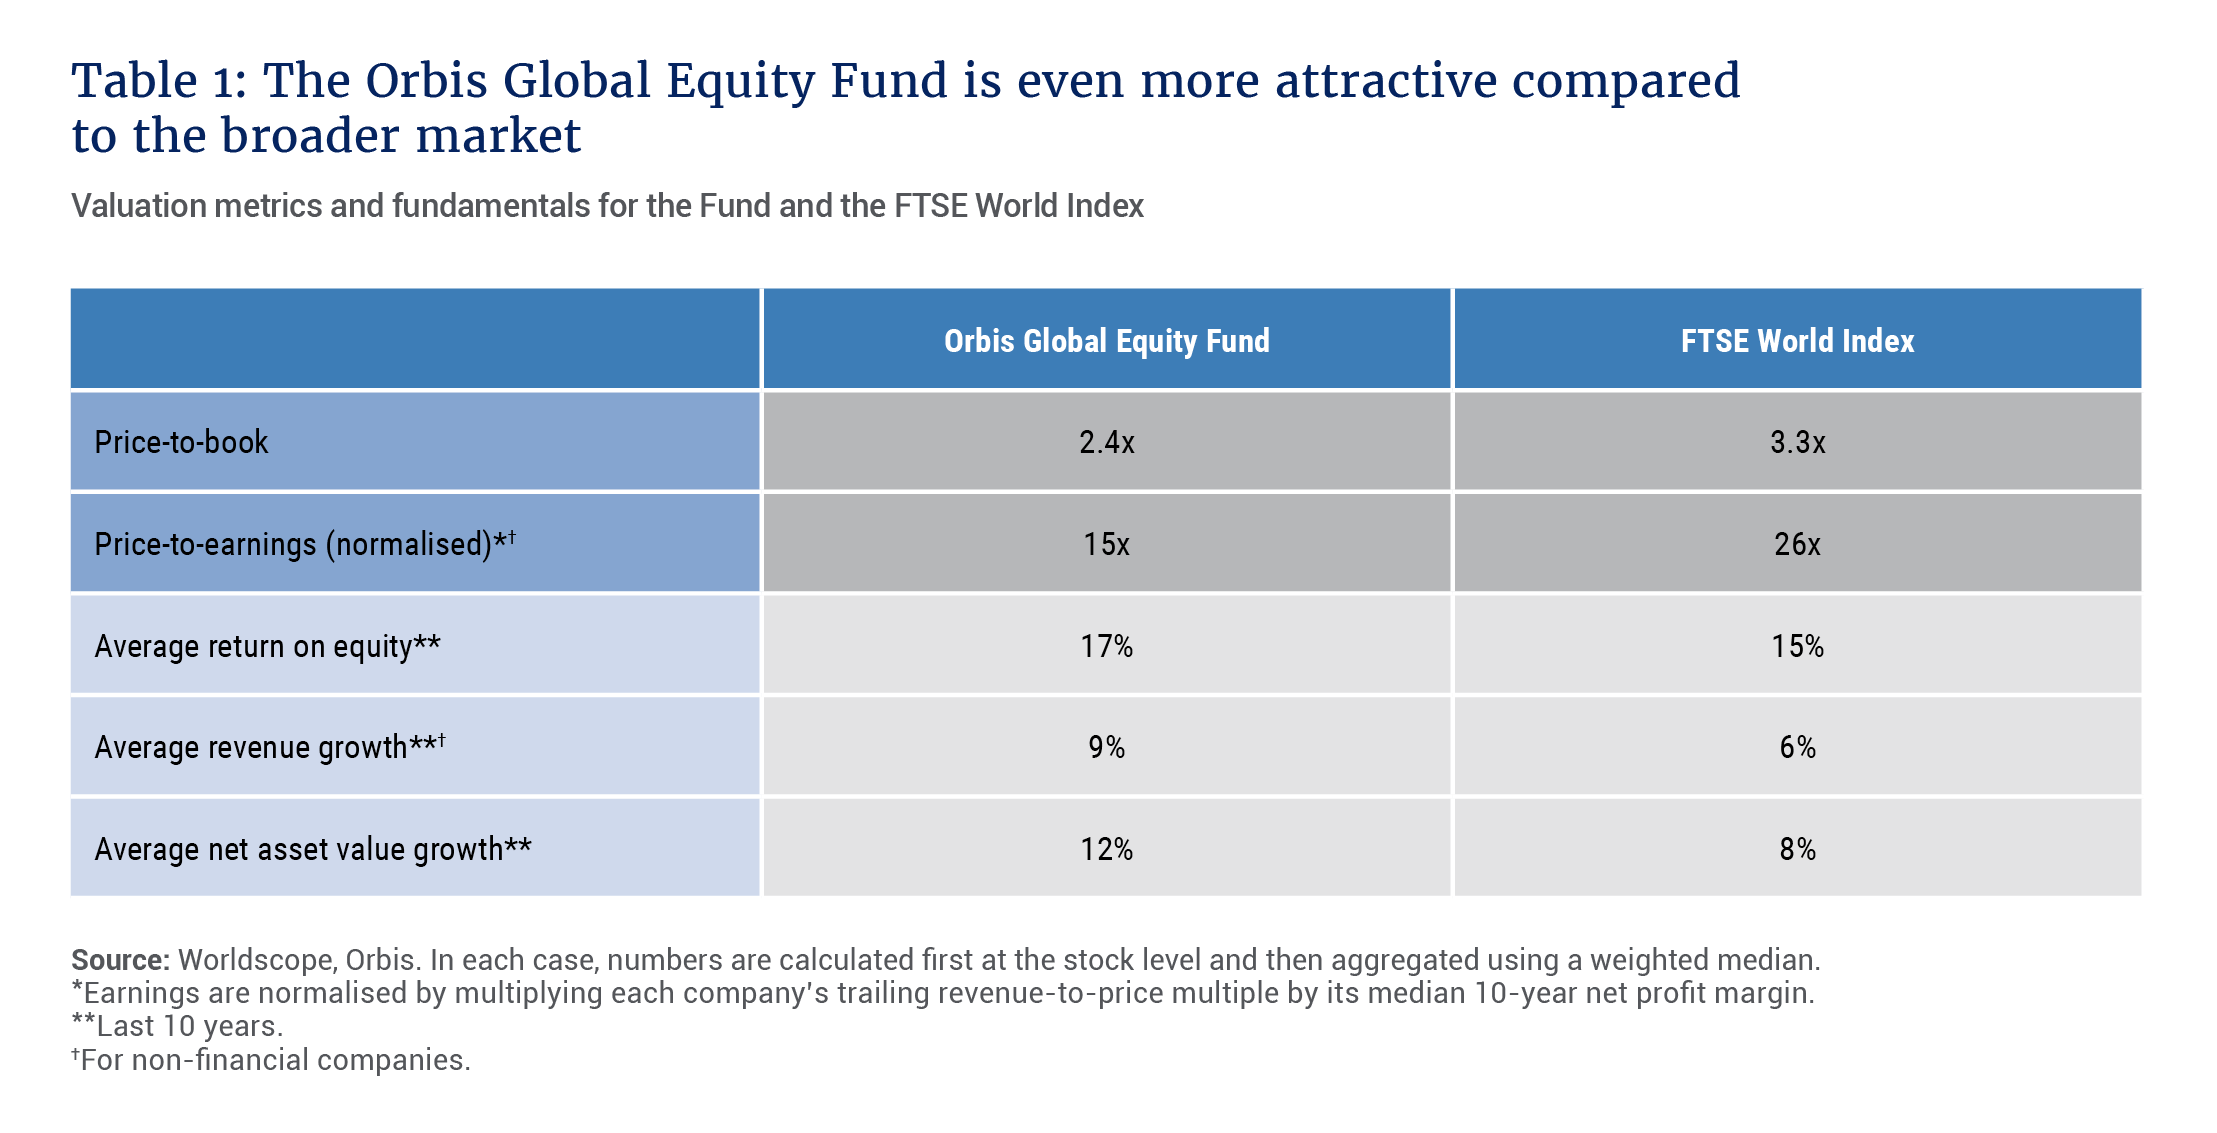 Attractiveness of Orbis Global Equity Fund compared to broader market - Allan Gray